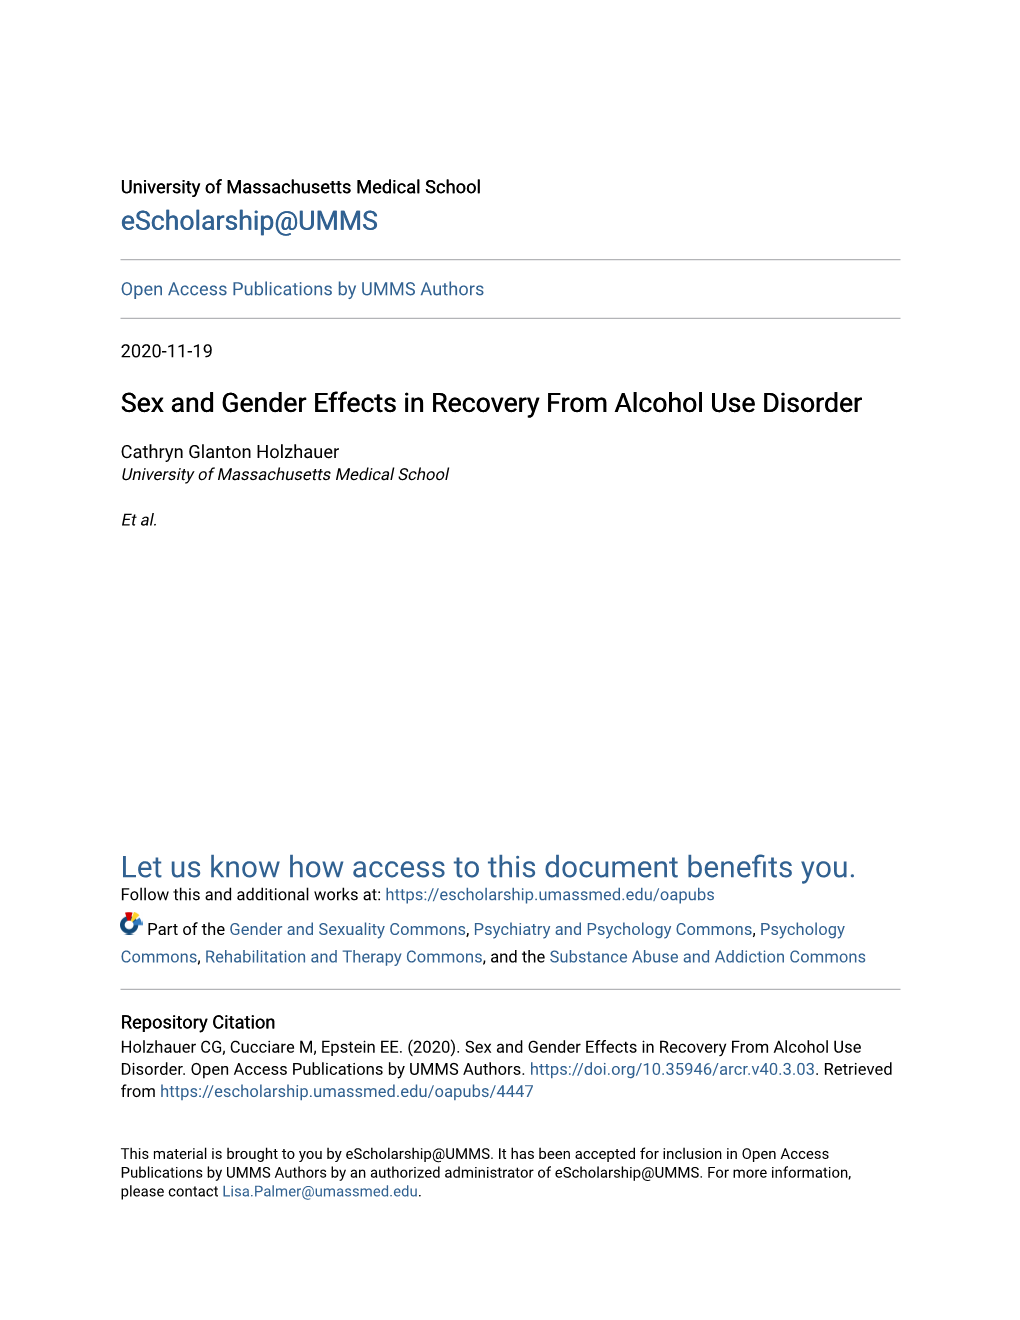 Sex and Gender Effects in Recovery from Alcohol Use Disorder